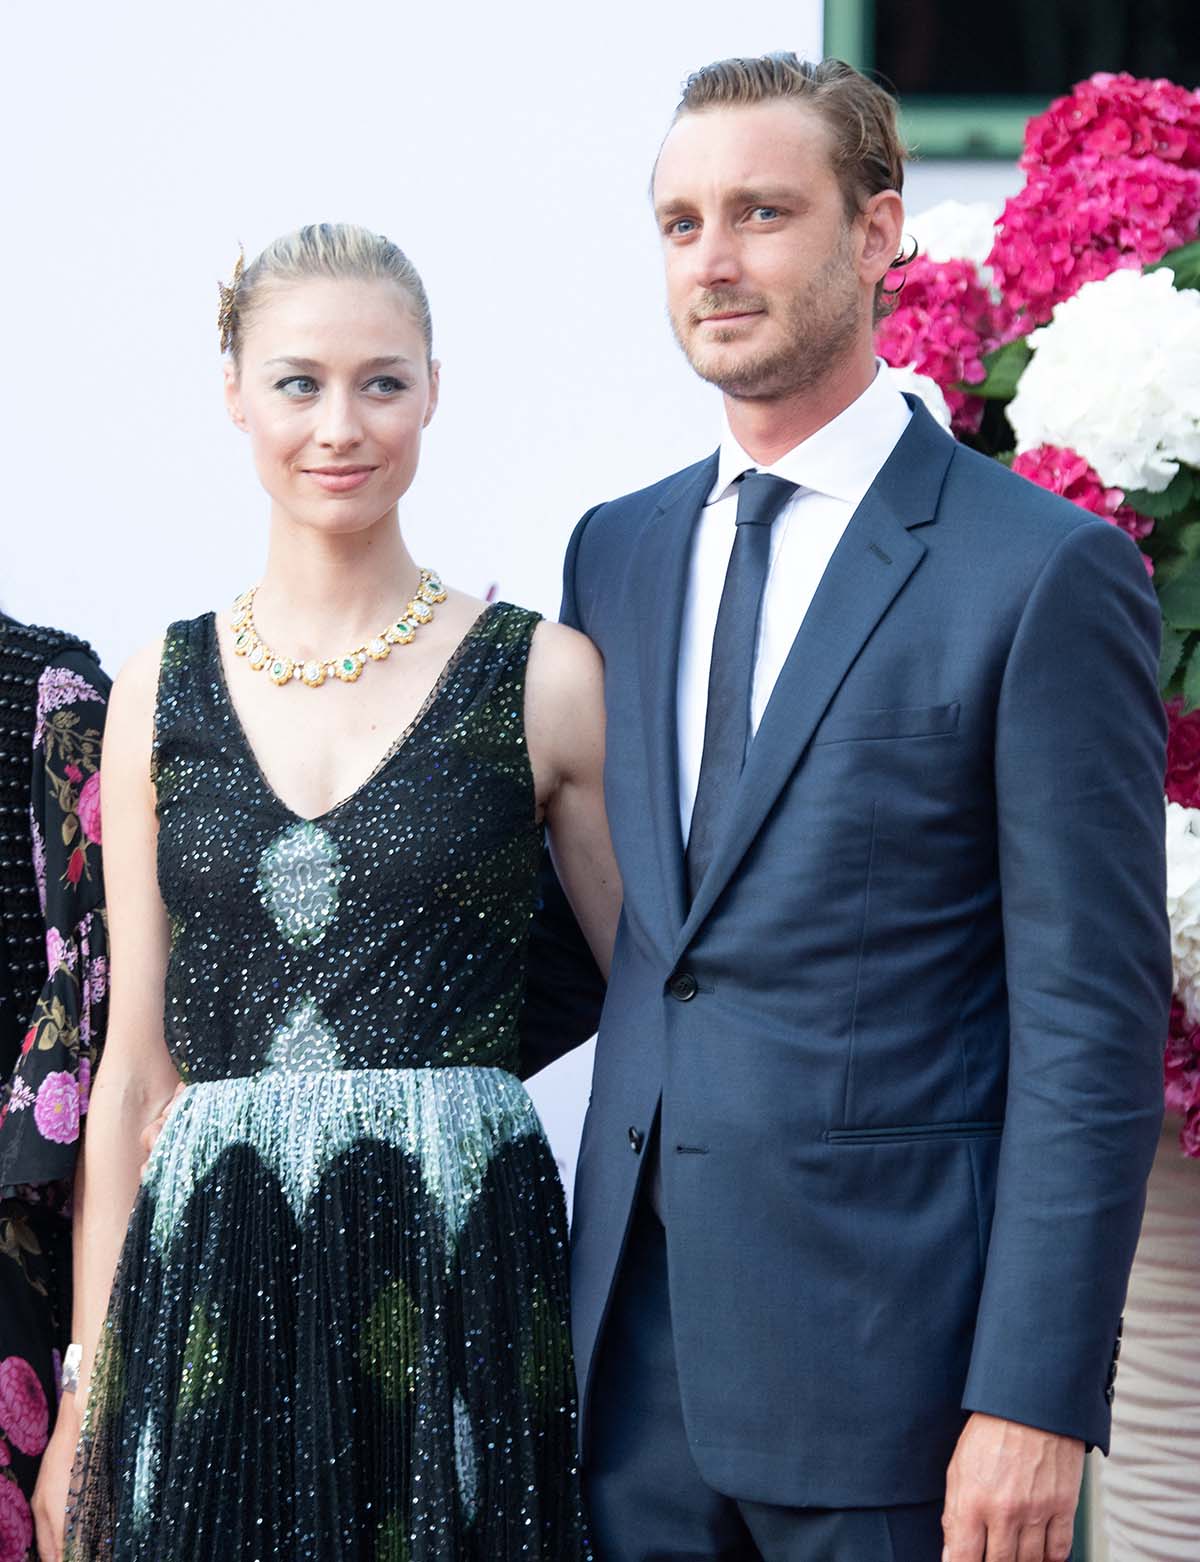 Pierre Casiraghi and his wife Beatrice Borromeo at the Red Cross SummerConcert on July 16, 2021 in Monte-Carlo, Monaco.